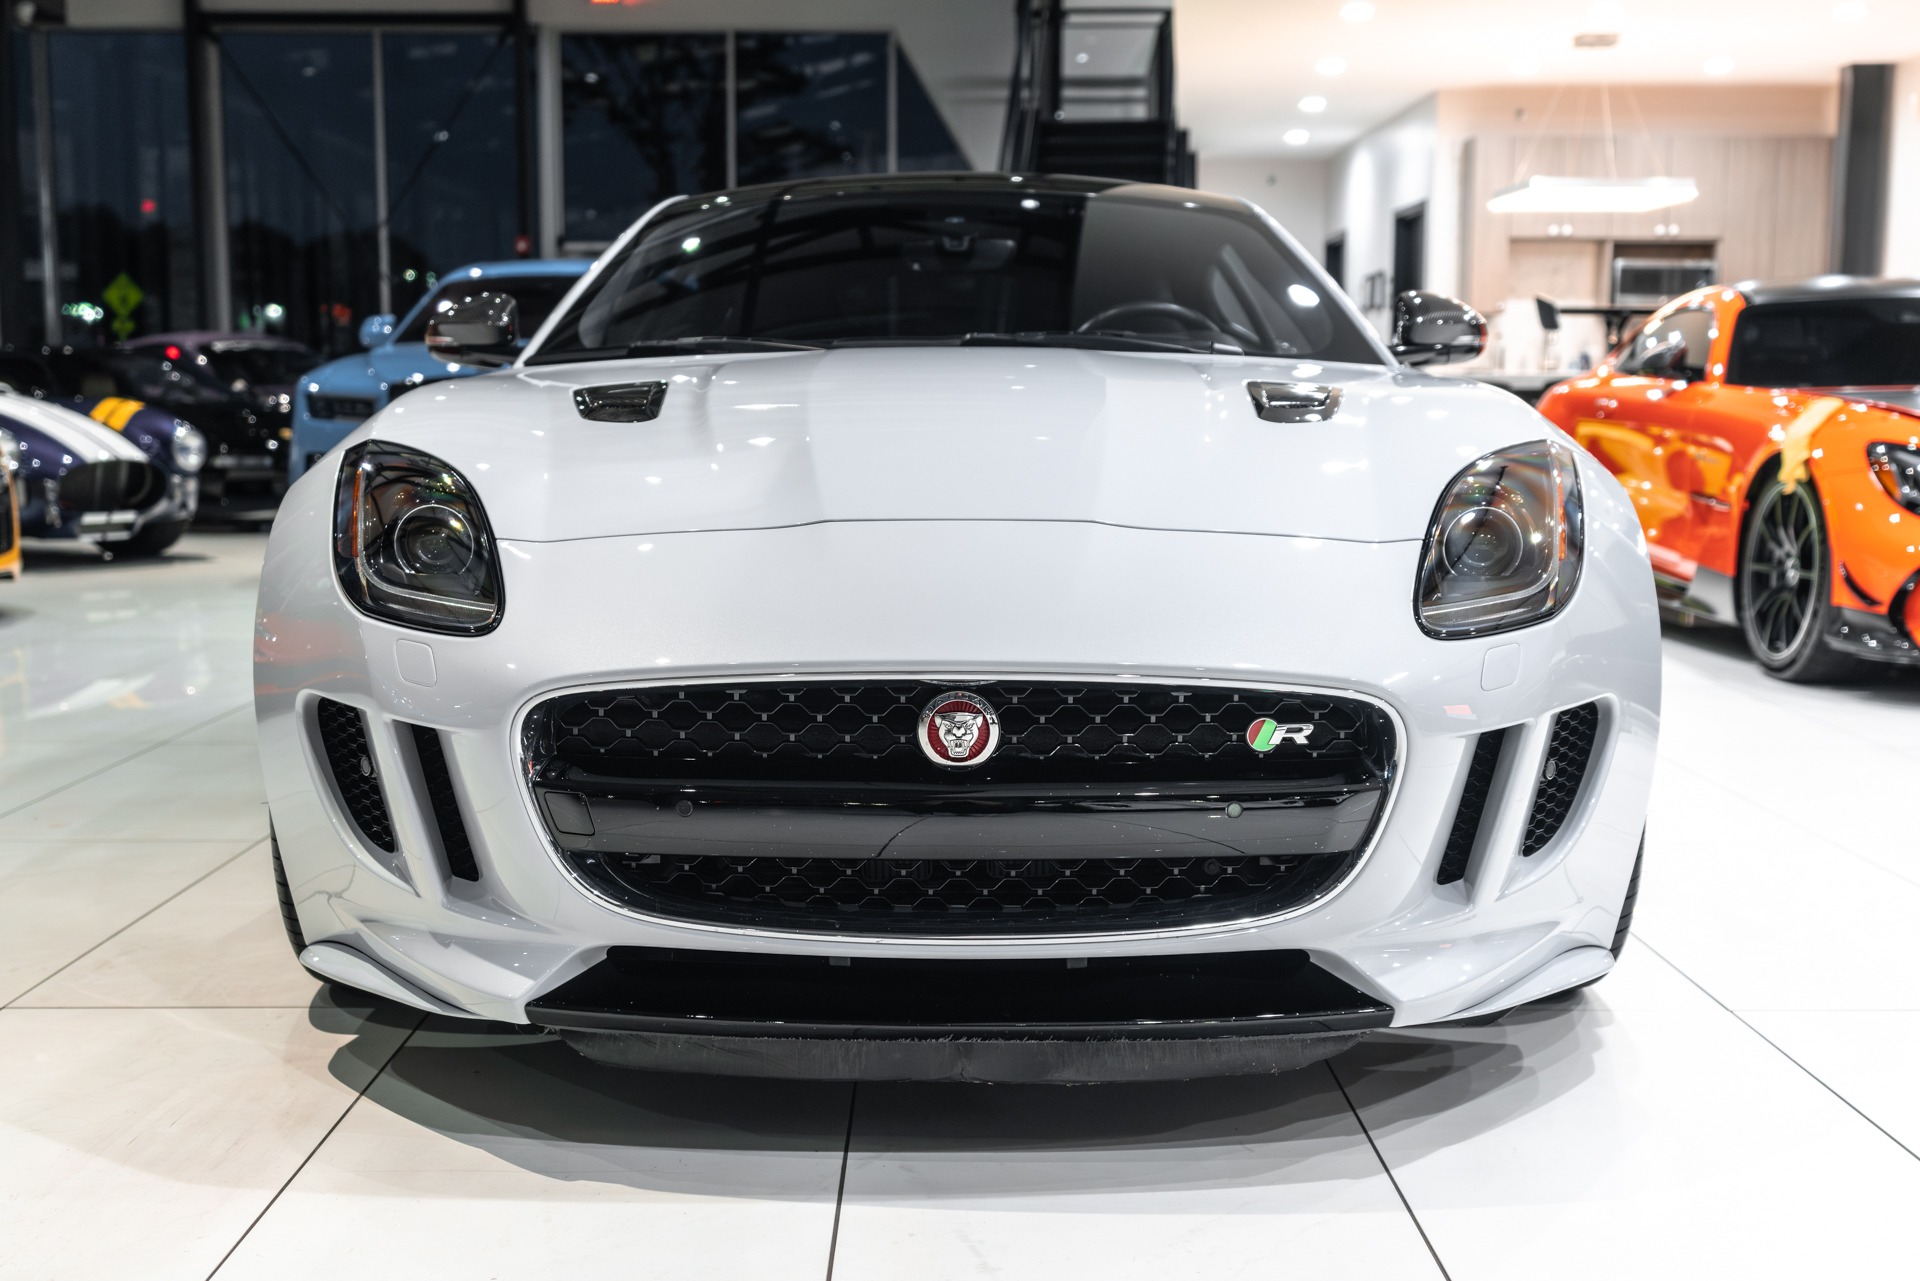 Used-2016-Jaguar-F-TYPE-R-Coupe-124K-MSRP-Carbon-Ceramic-Brakes-Carbon-Roof-Extended-Leather